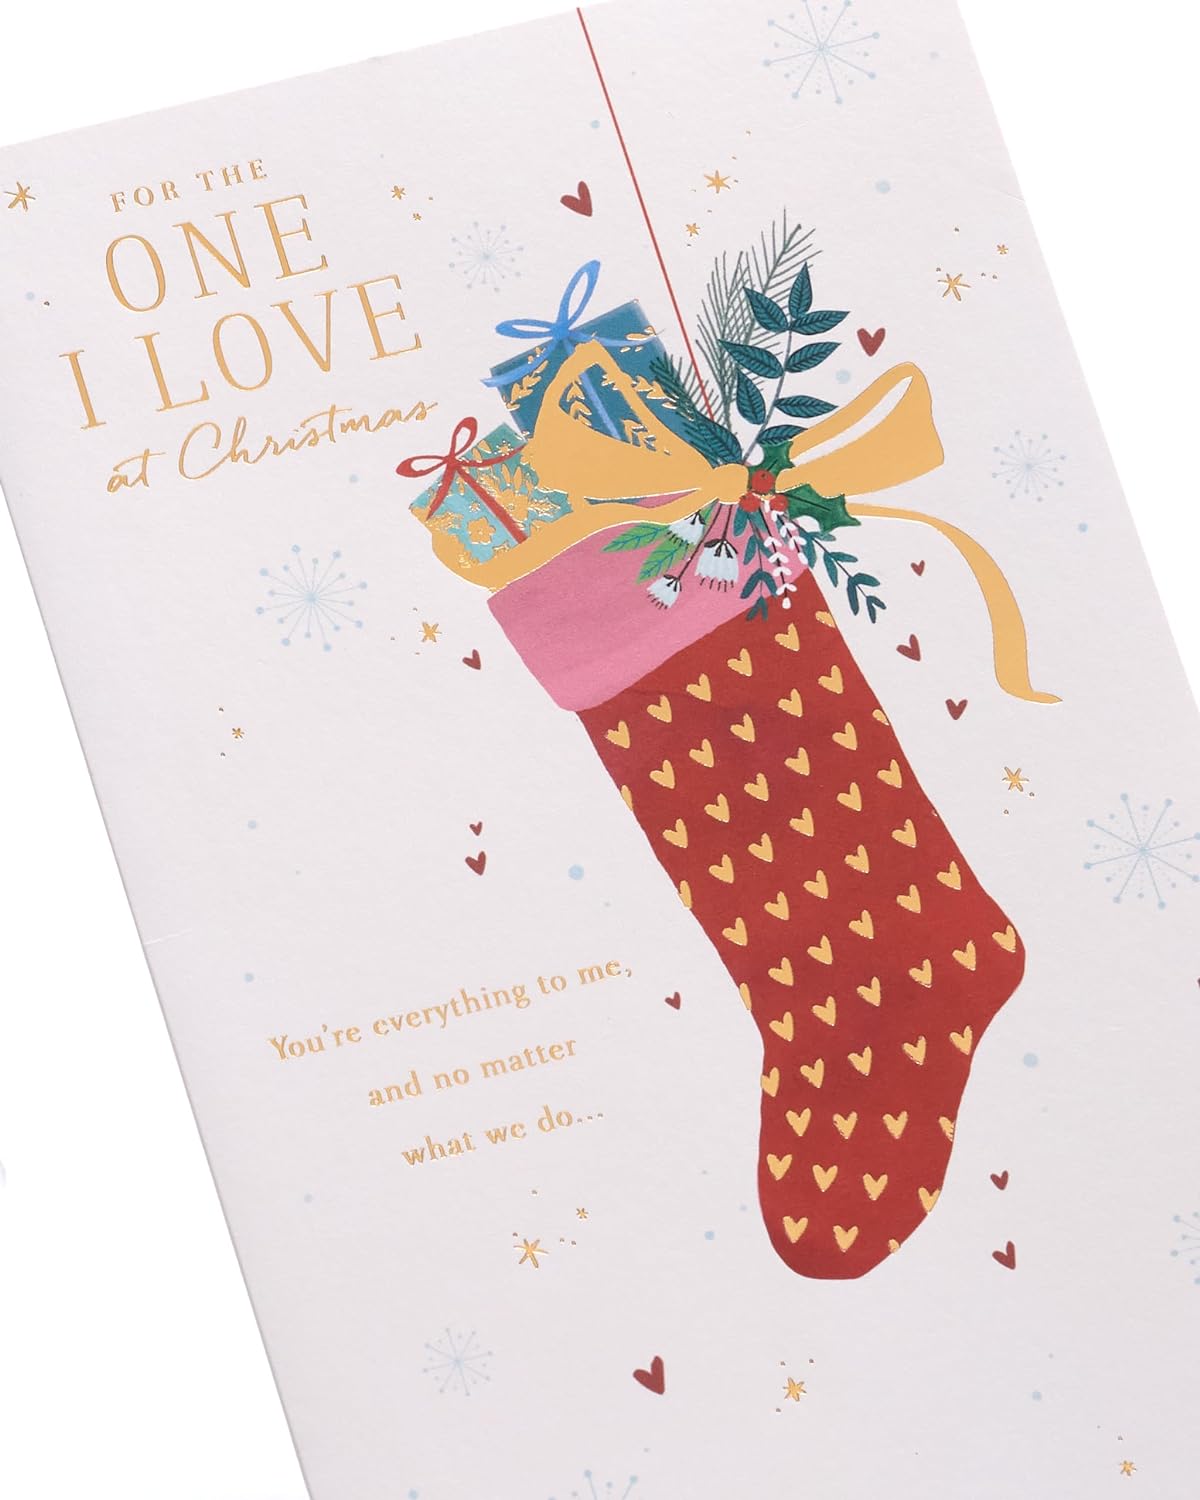 For the One I Love Stocking Design Christmas Card